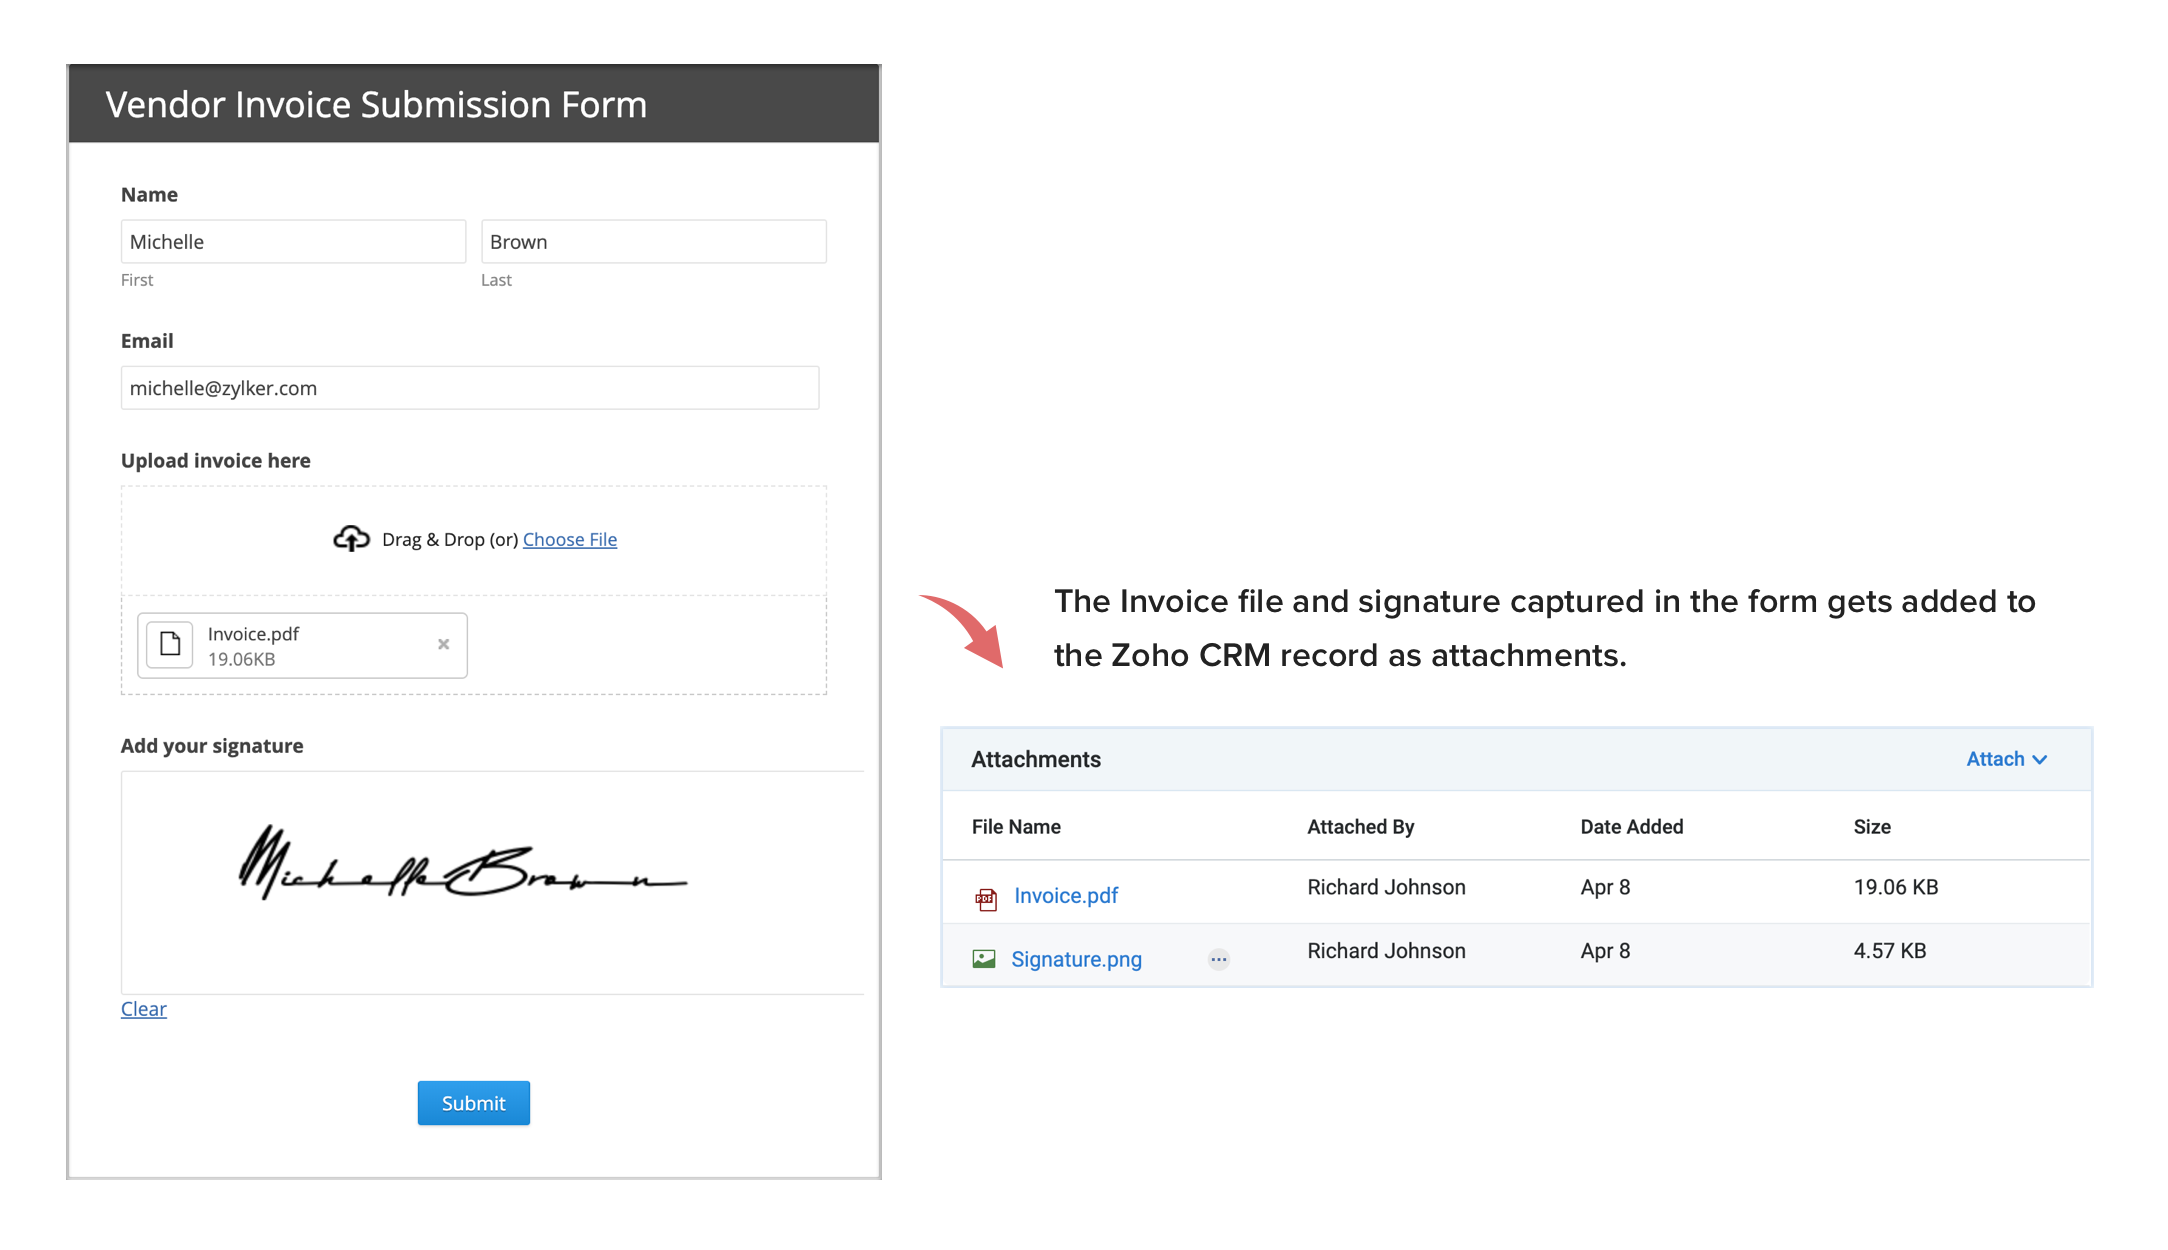 Attachments pushed to Zoho CRM